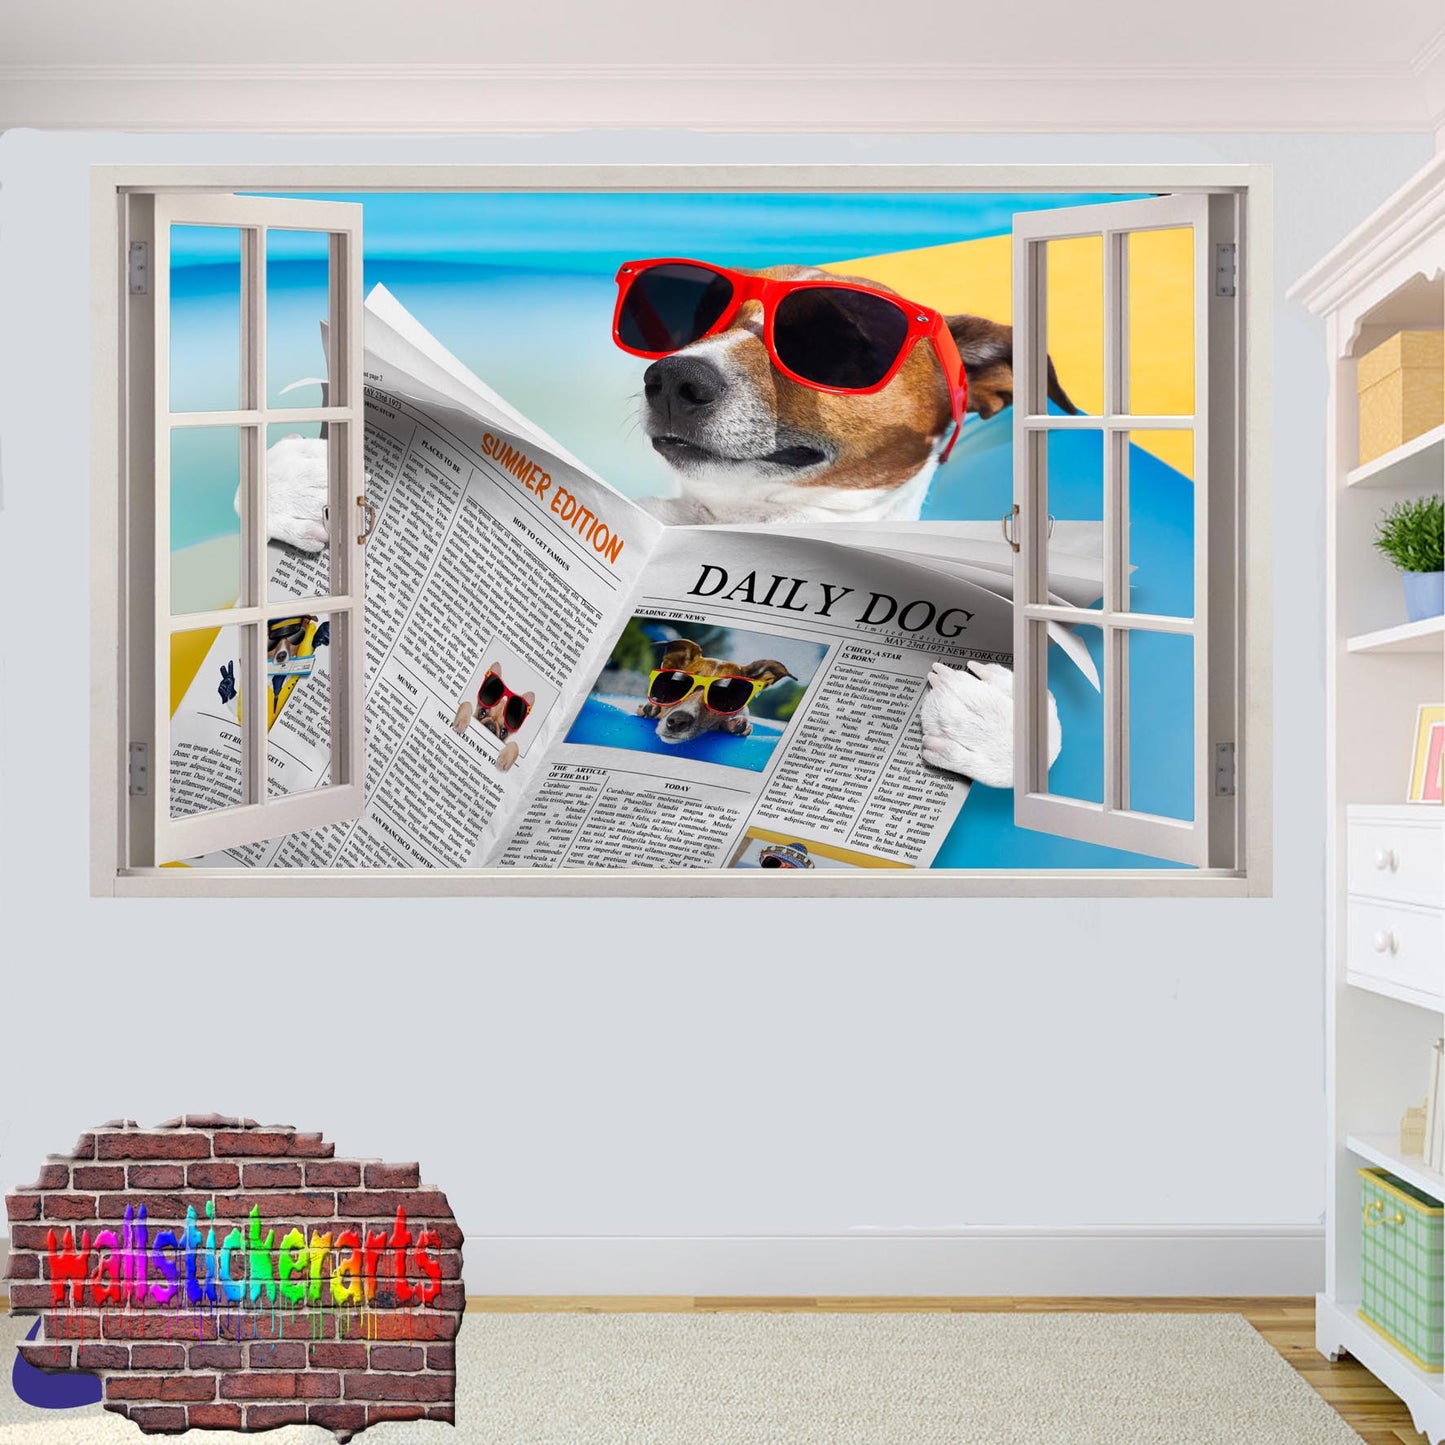 Funny Jack Russell on Holiday 3d Art Wall Sticker Room Office Nursery Shop Decor Decal Mural